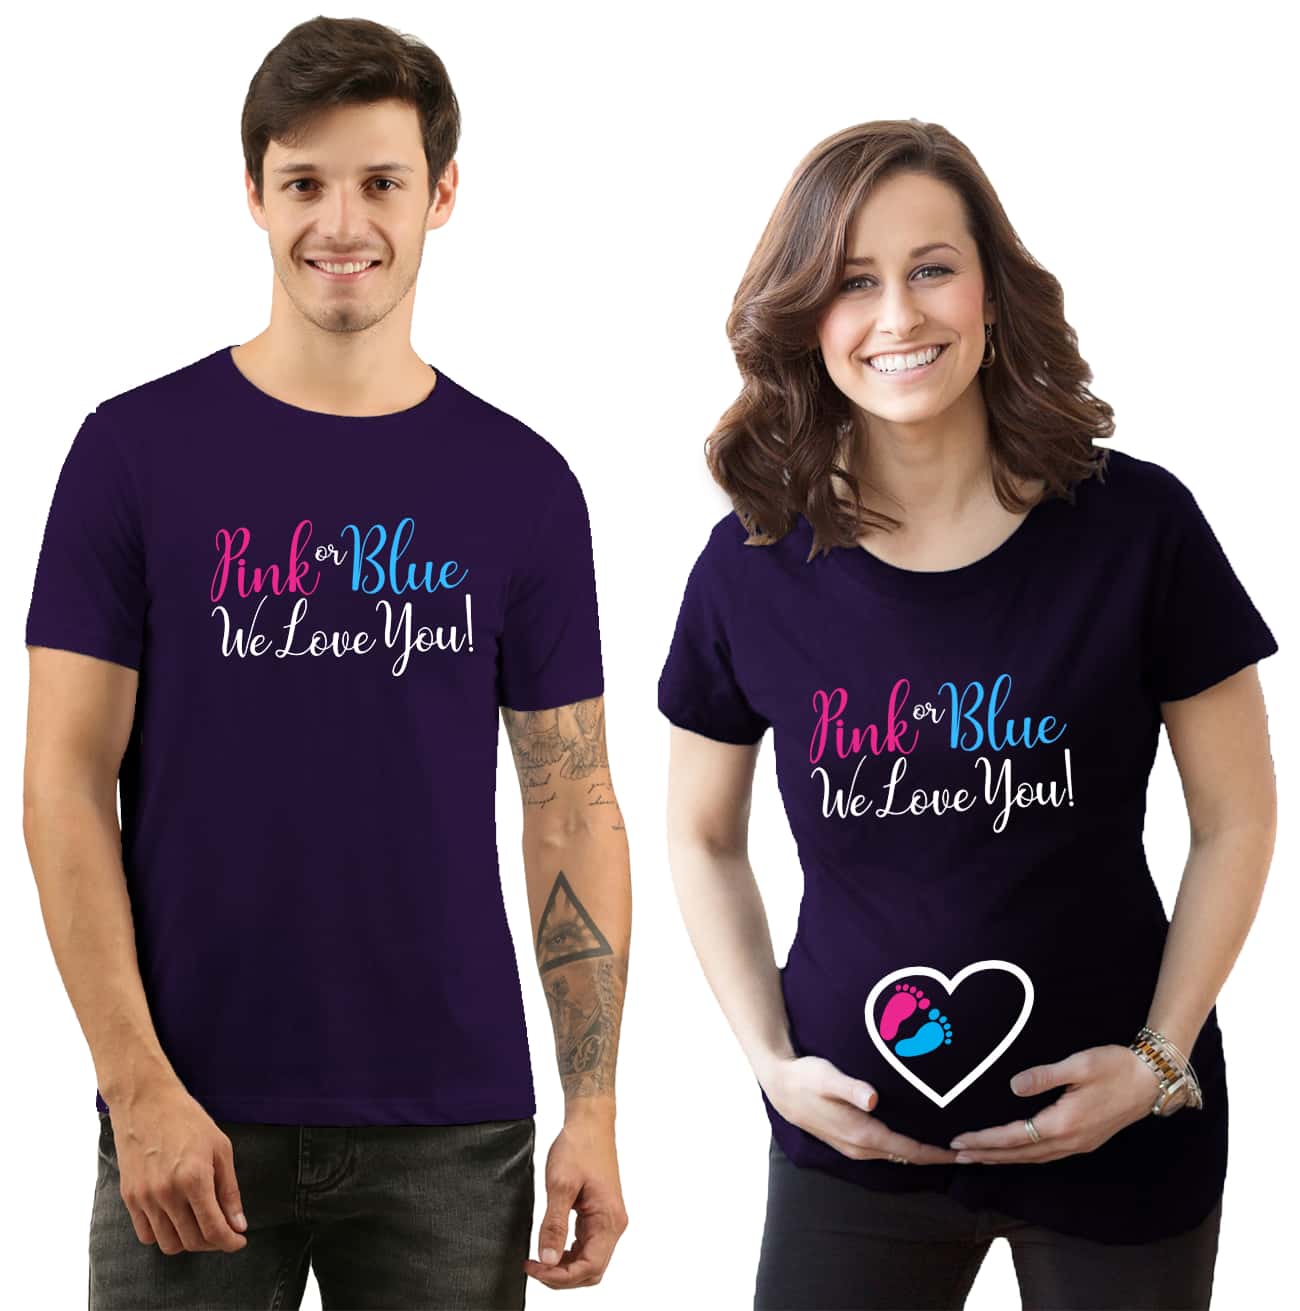 Pink or Blue We Love You Maternity Couple TShirts Online